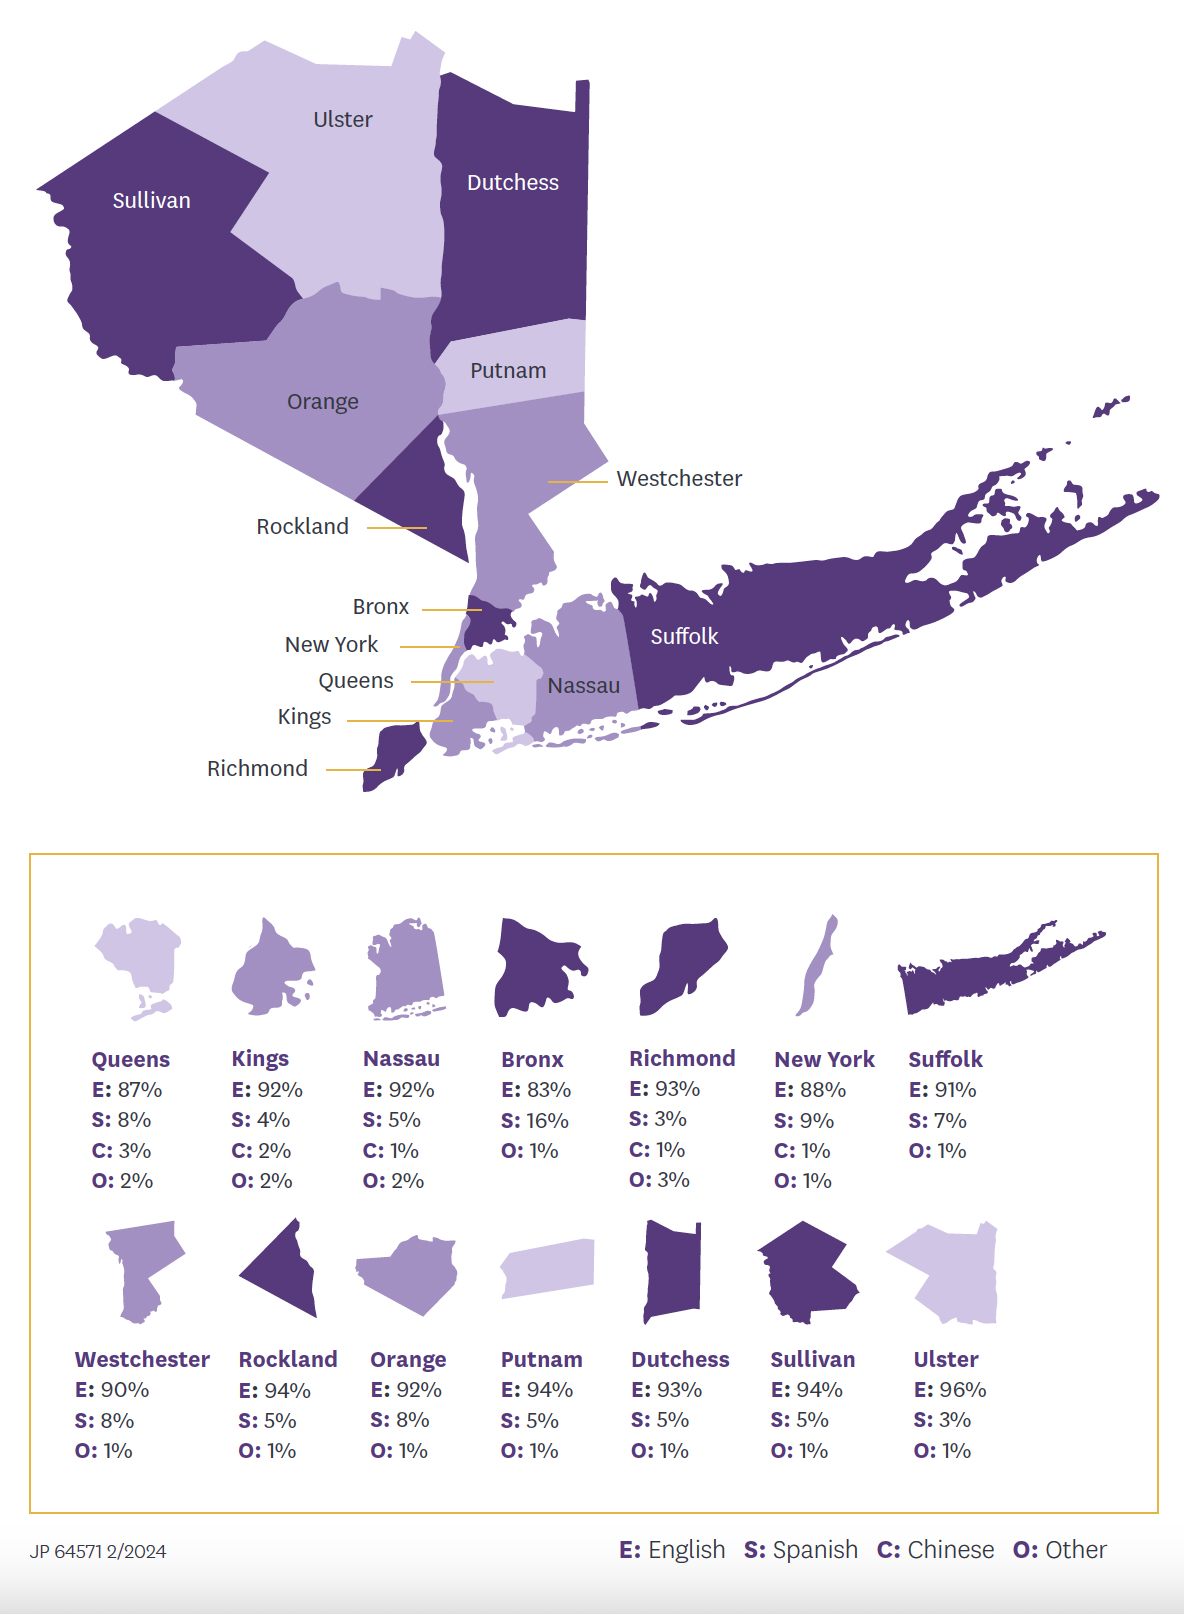 A map of New York's counties which display the percentage of members' language preferences for English, Spanish, Chinese and Italian.